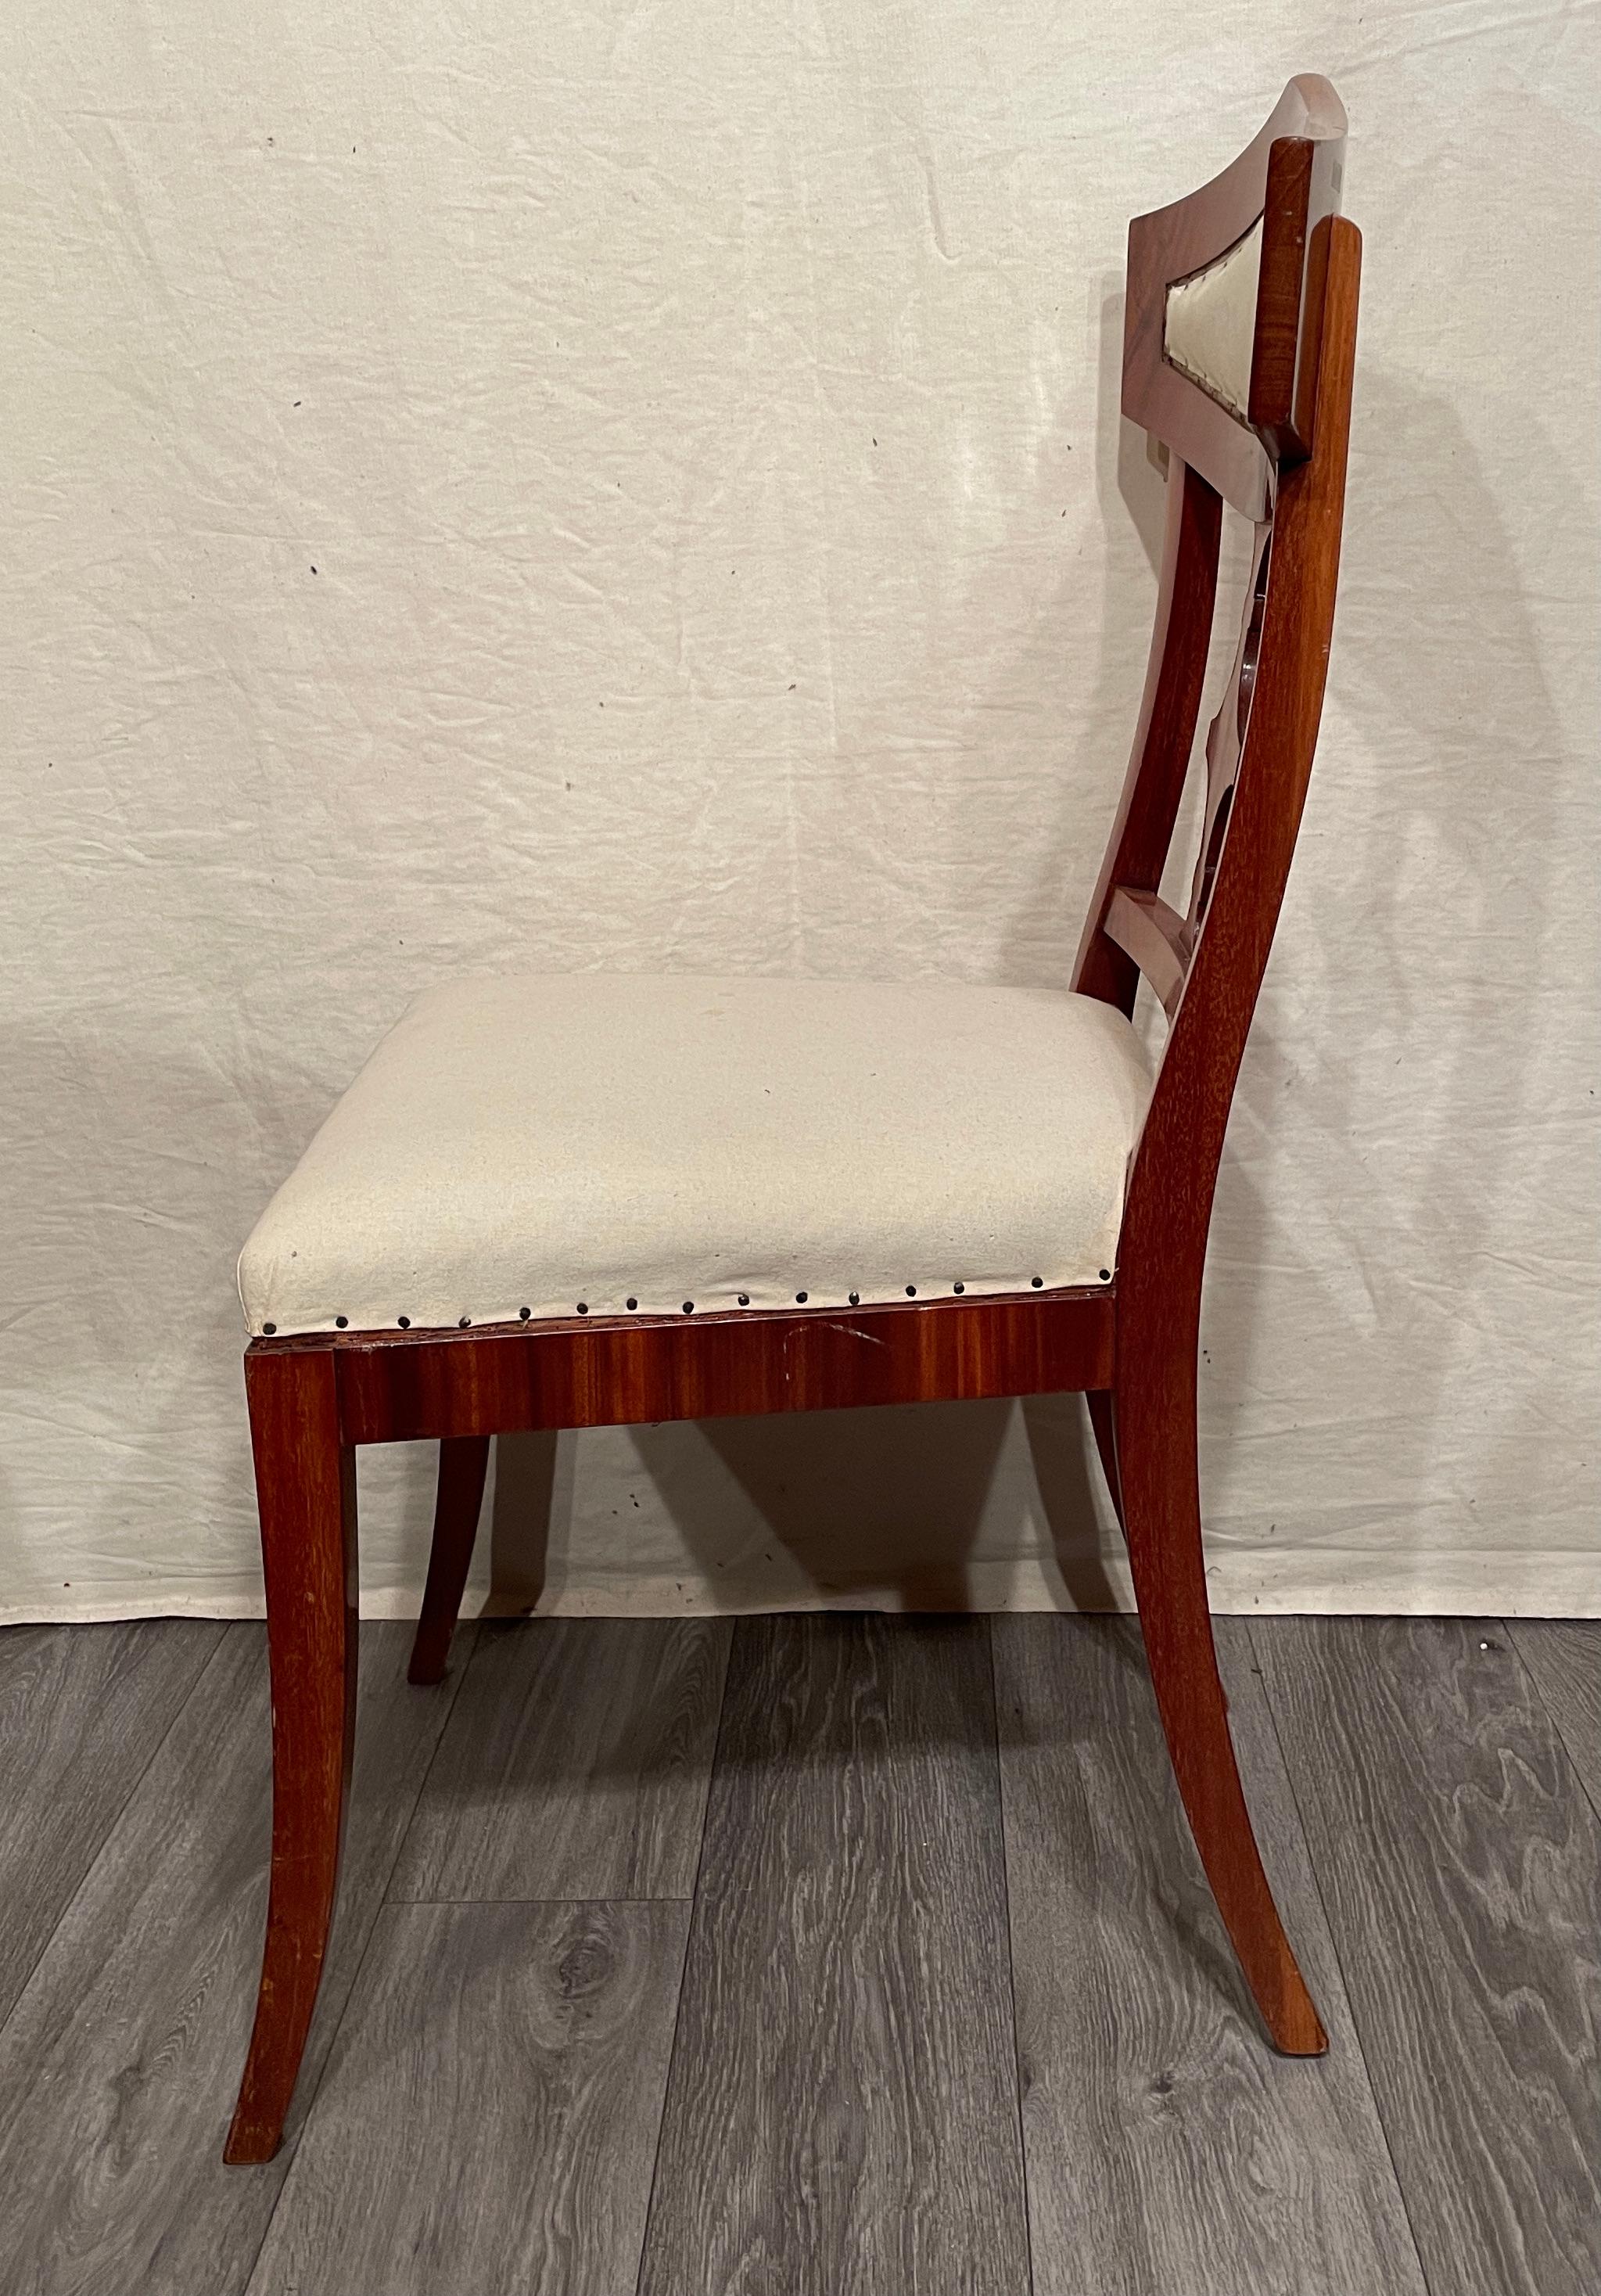 A set of four elegant Biedermeier chairs, mahogany veneer. The back has an elegant open work decor. 
The chairs are in very good condition. They have a new upholstery and you can choose a fabric for an additional fee. The chairs ship from Germany